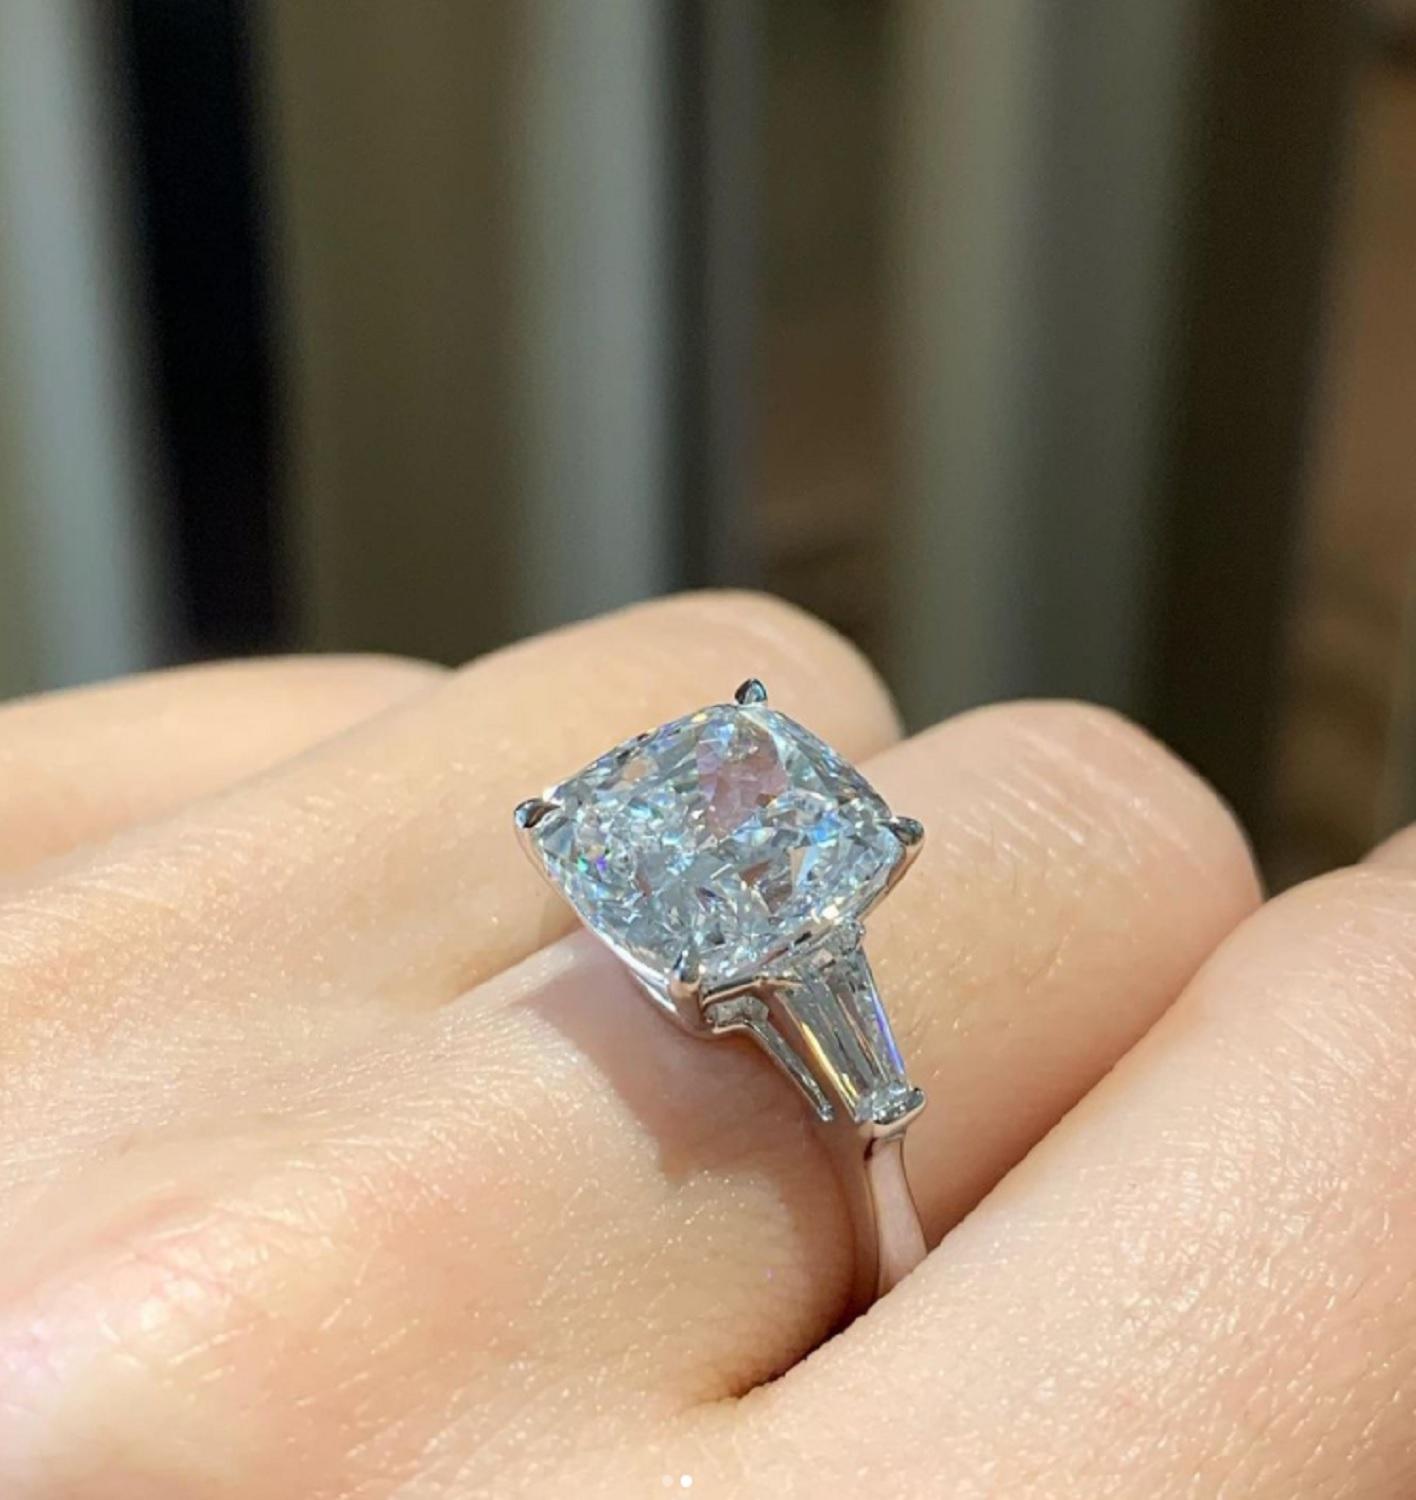 An exquisite ring composed by a GIA Certified 5 carat cushion cut diamond with two side tapered baguette diamonds. 
The setting is made in solid 18 carats white gold
 E COLOR
FLAWLESS CLARITY